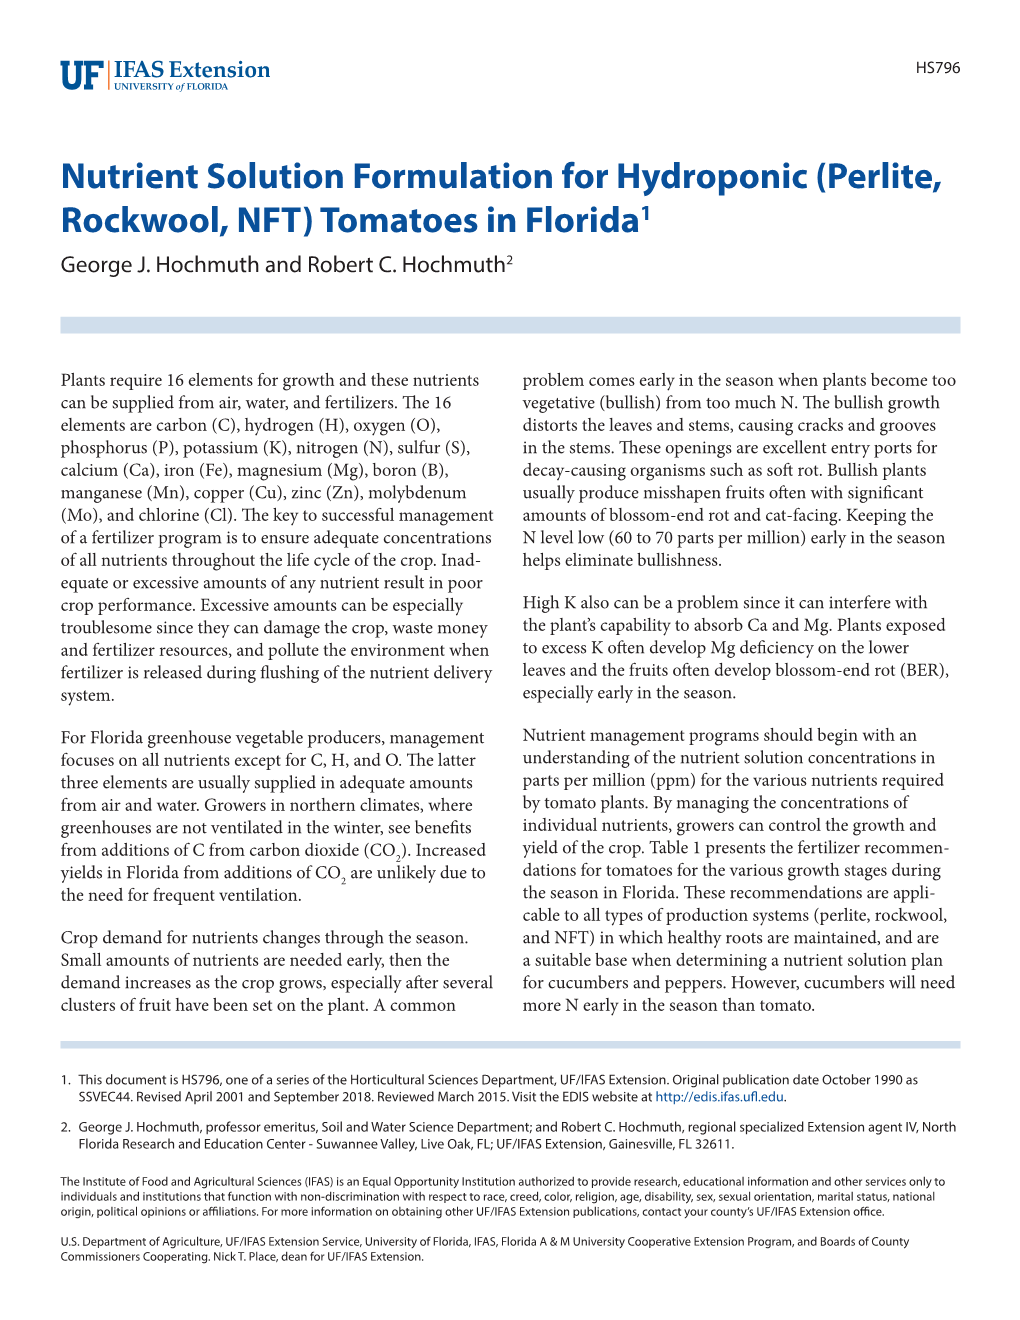 Nutrient Solution Formulation for Hydroponic (Perlite, Rockwool, NFT) Tomatoes in Florida1 George J